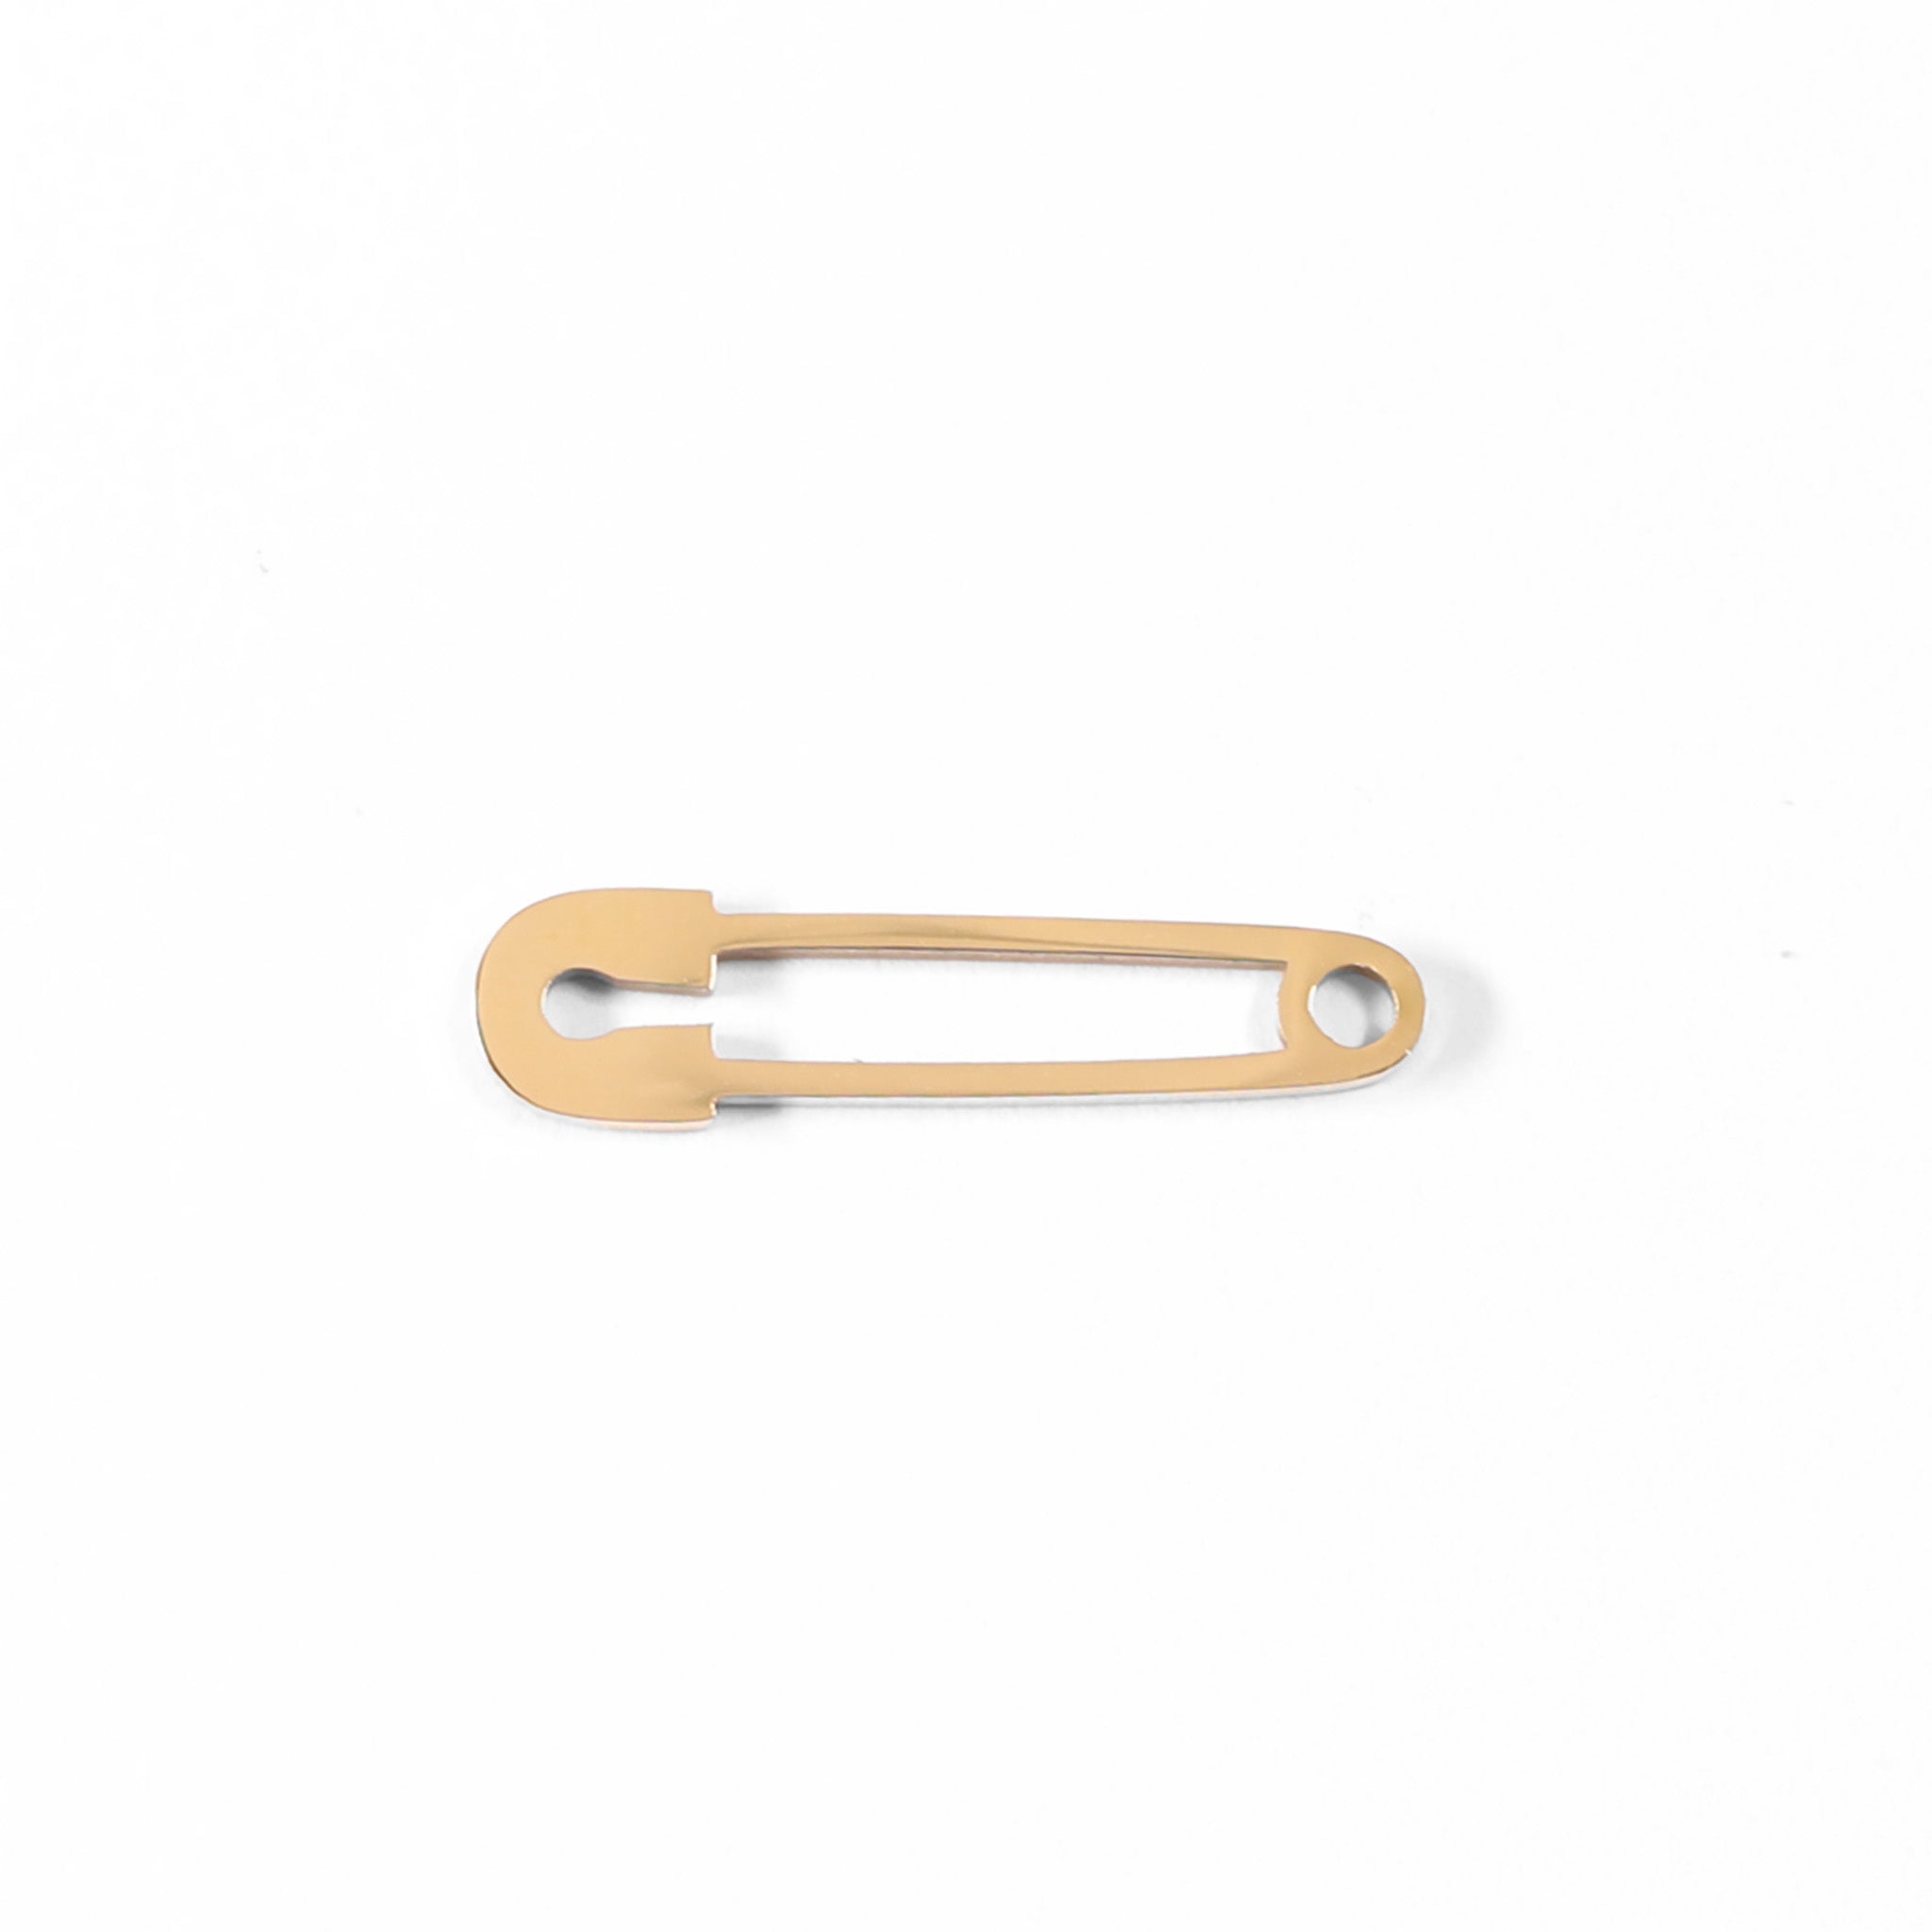 18K Gold PVD Stainless Steel Paperclip Charm / PDL0035